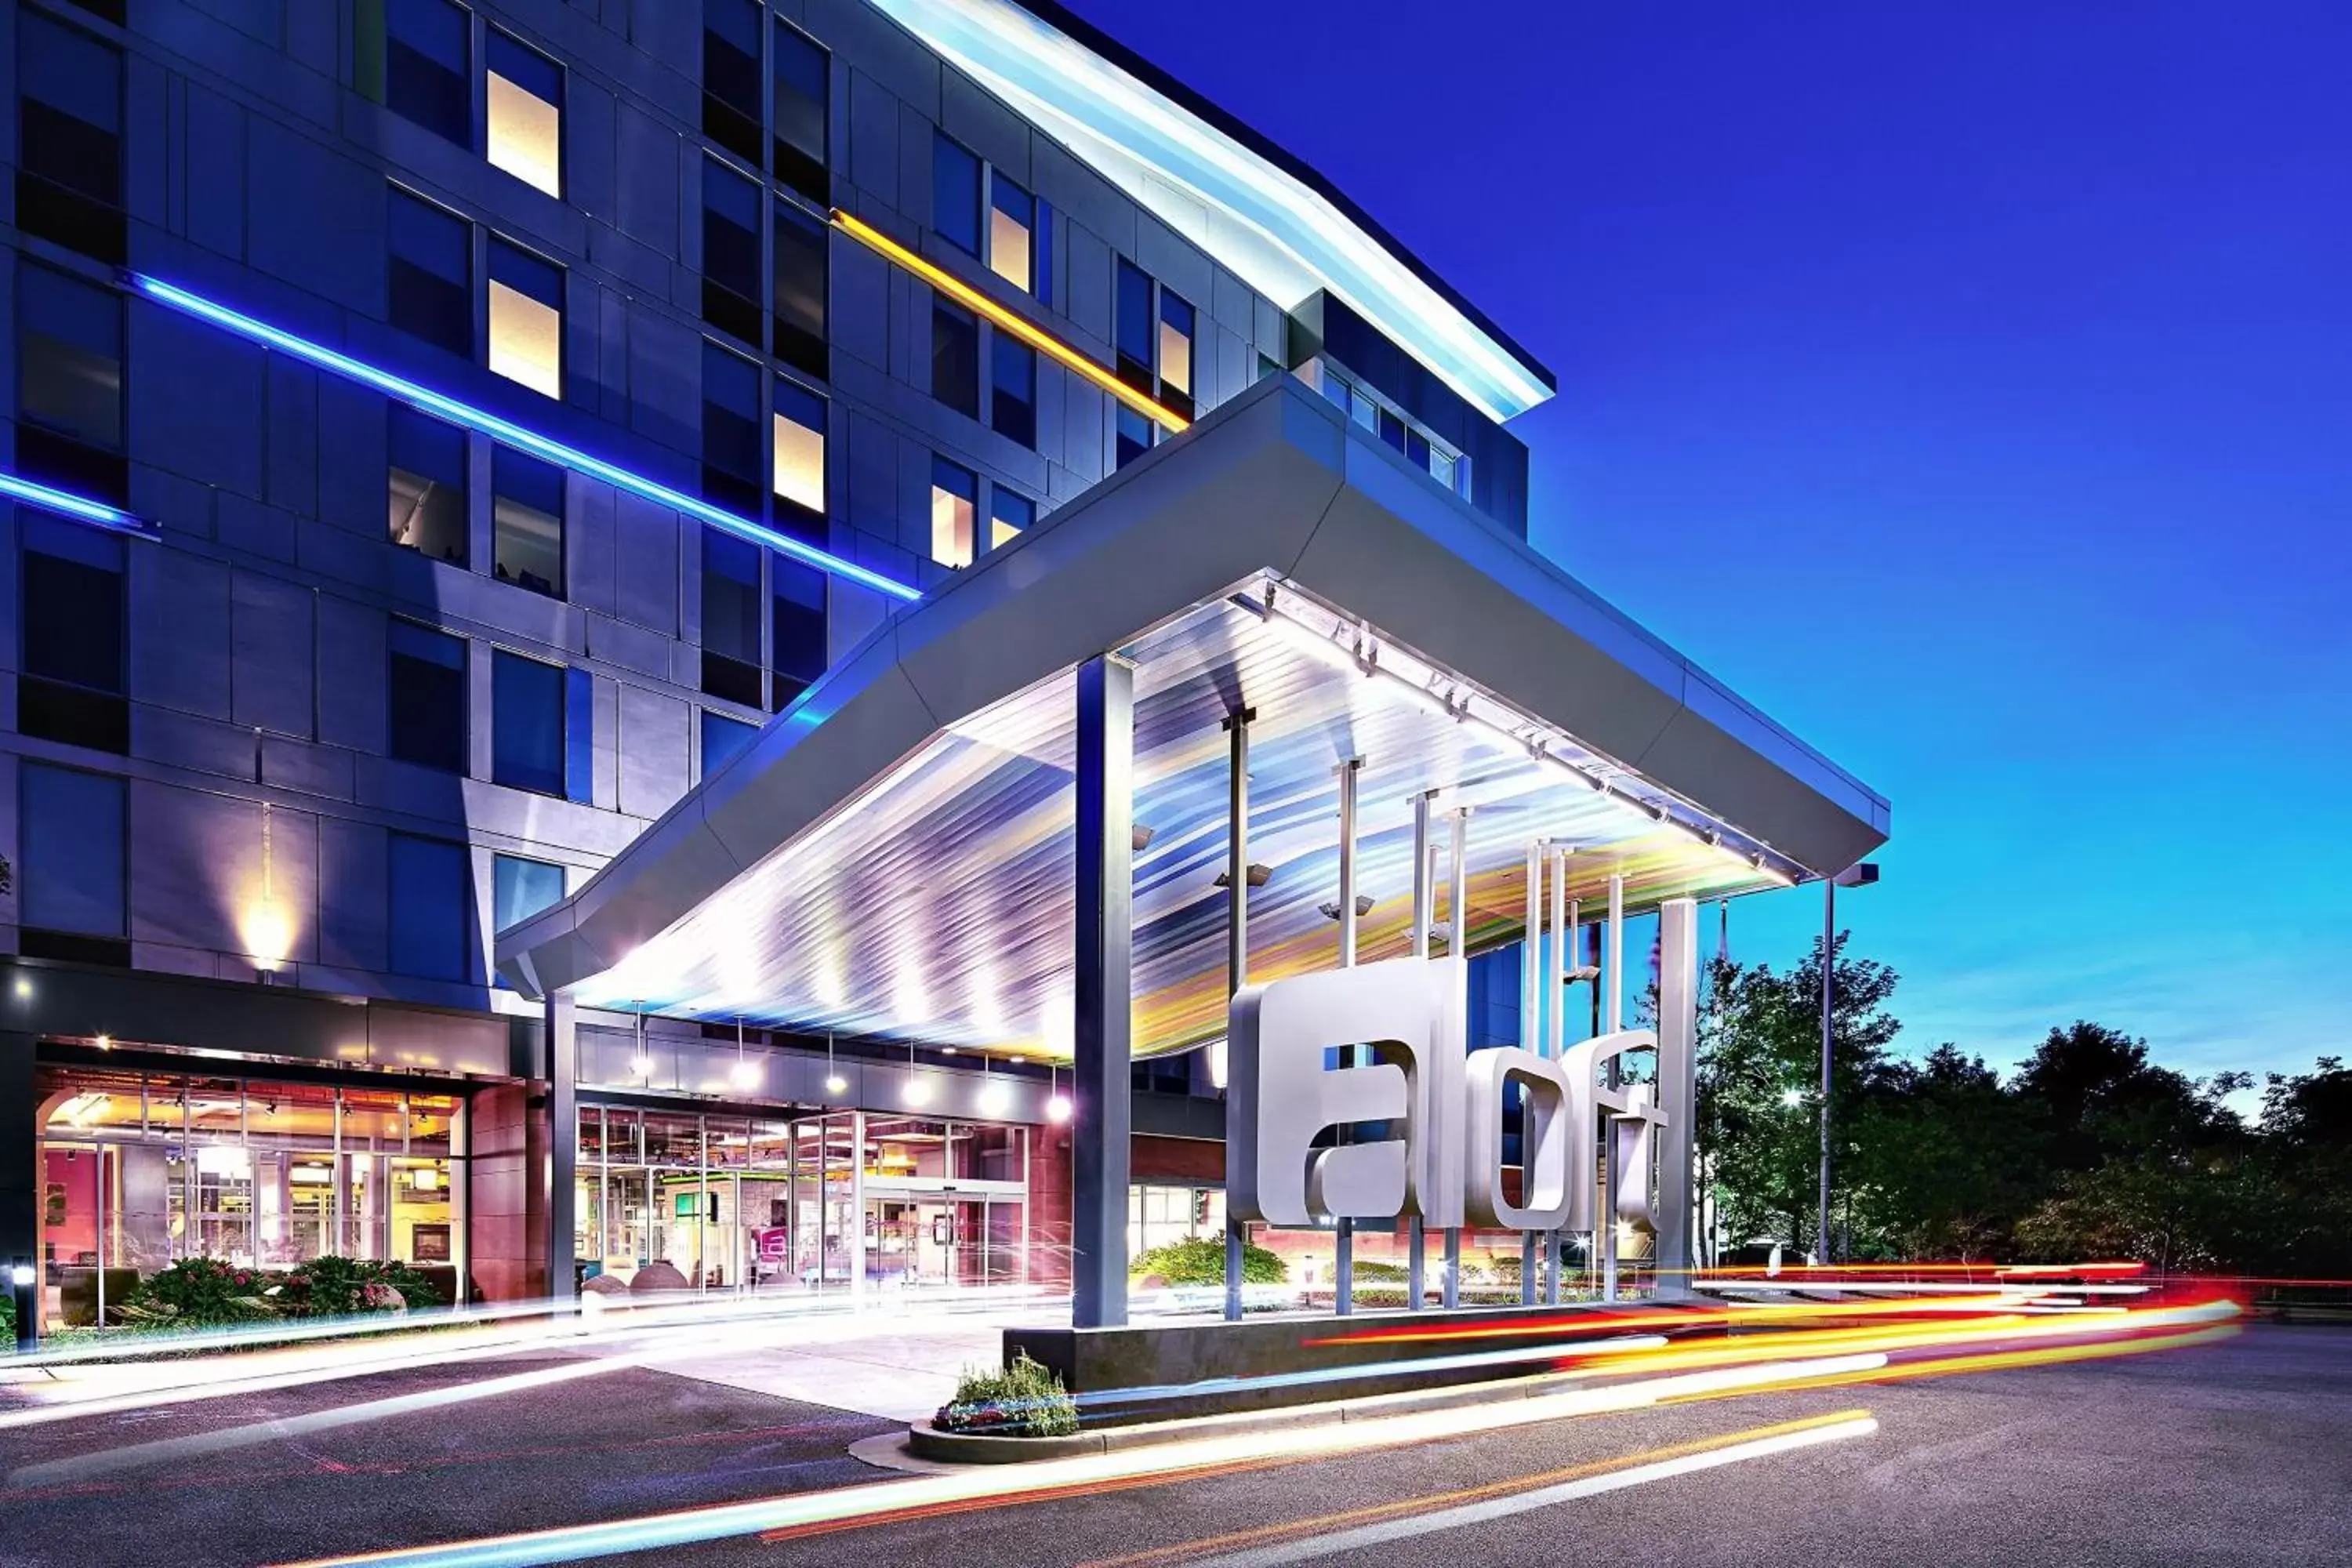 Property Building in Aloft Arundel Mills BWI Airport